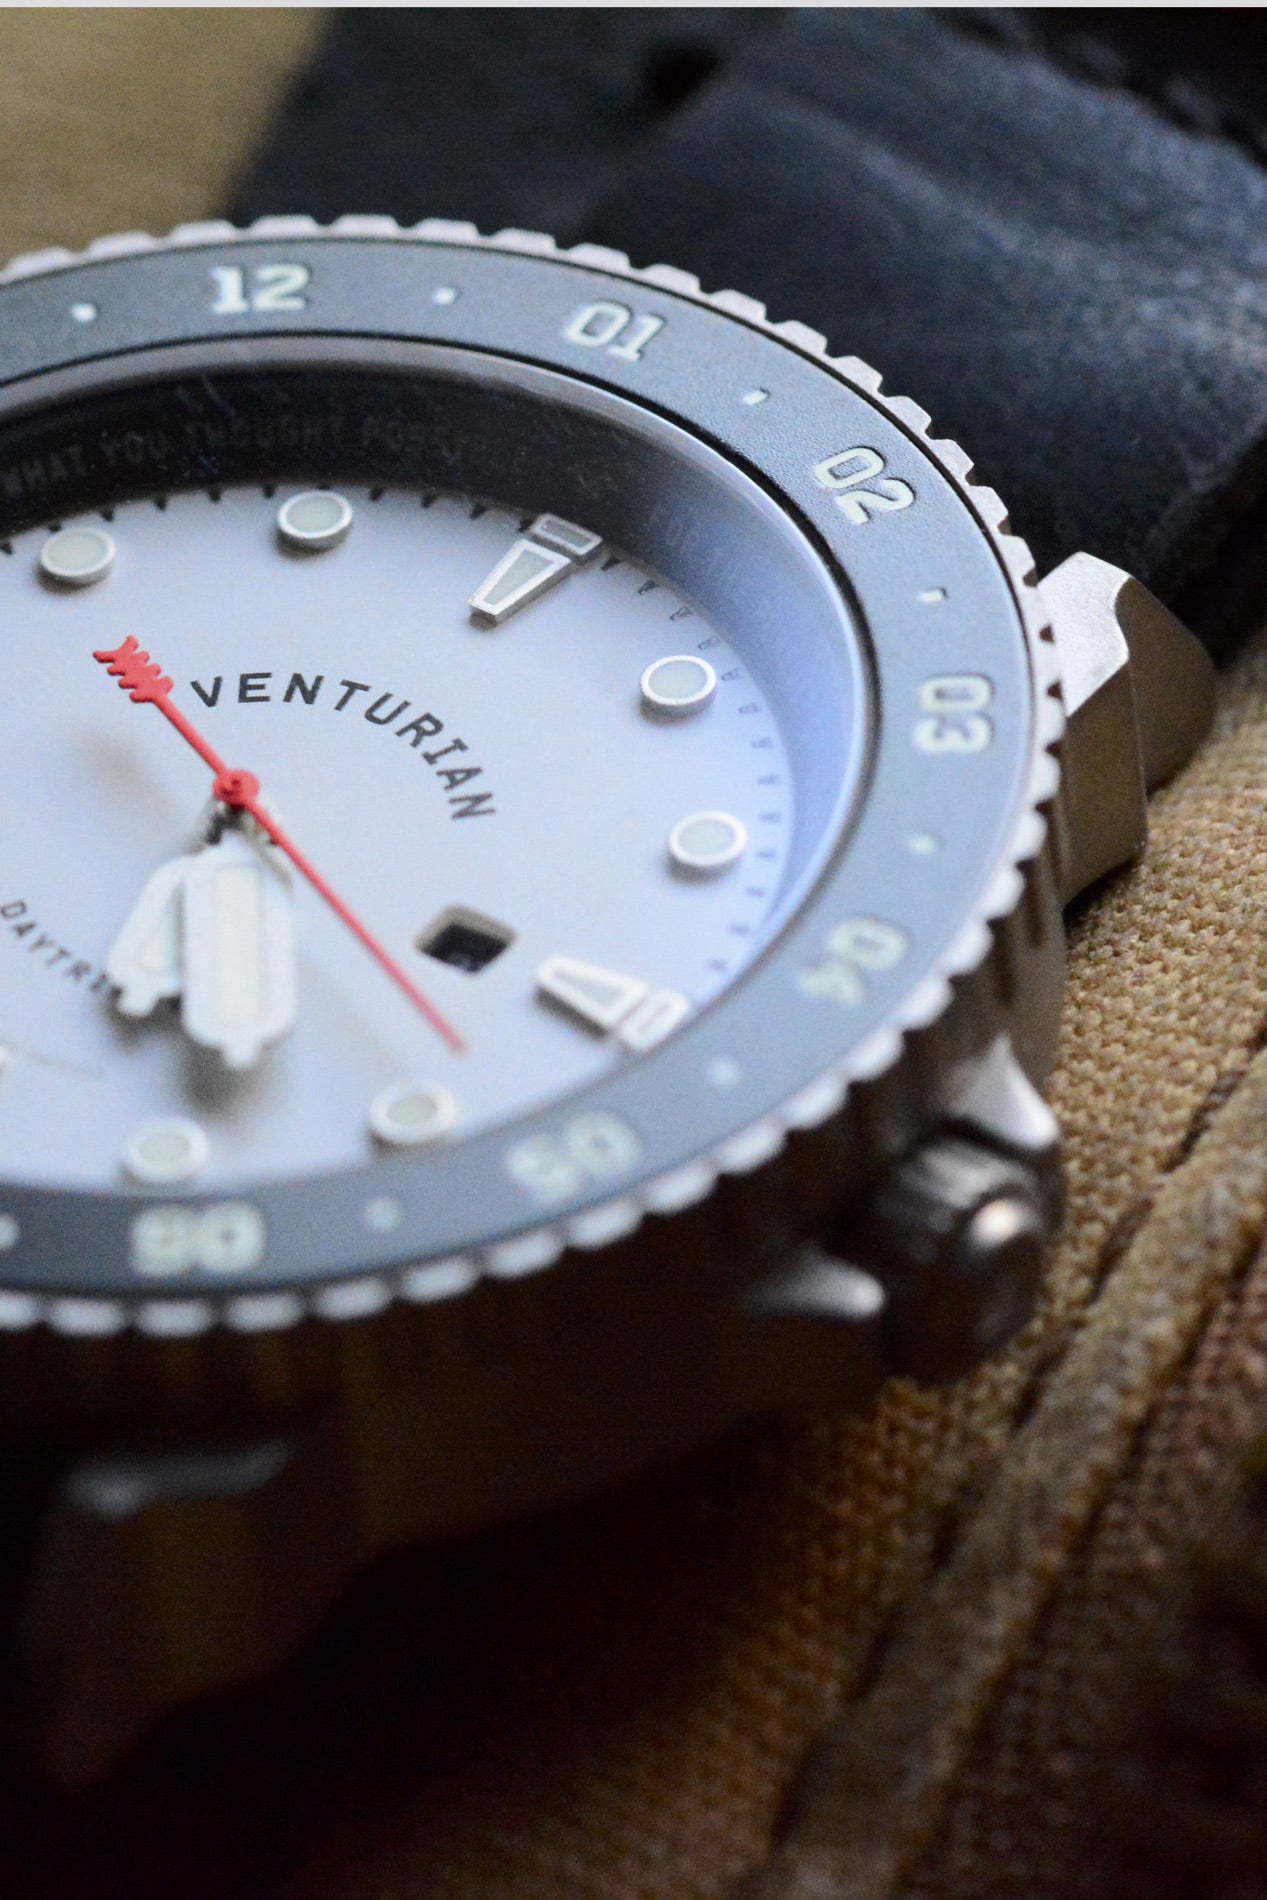 Venturian WatchWorks Daytripper with a white watch dial. This mens watch comes on a leather watch strap.